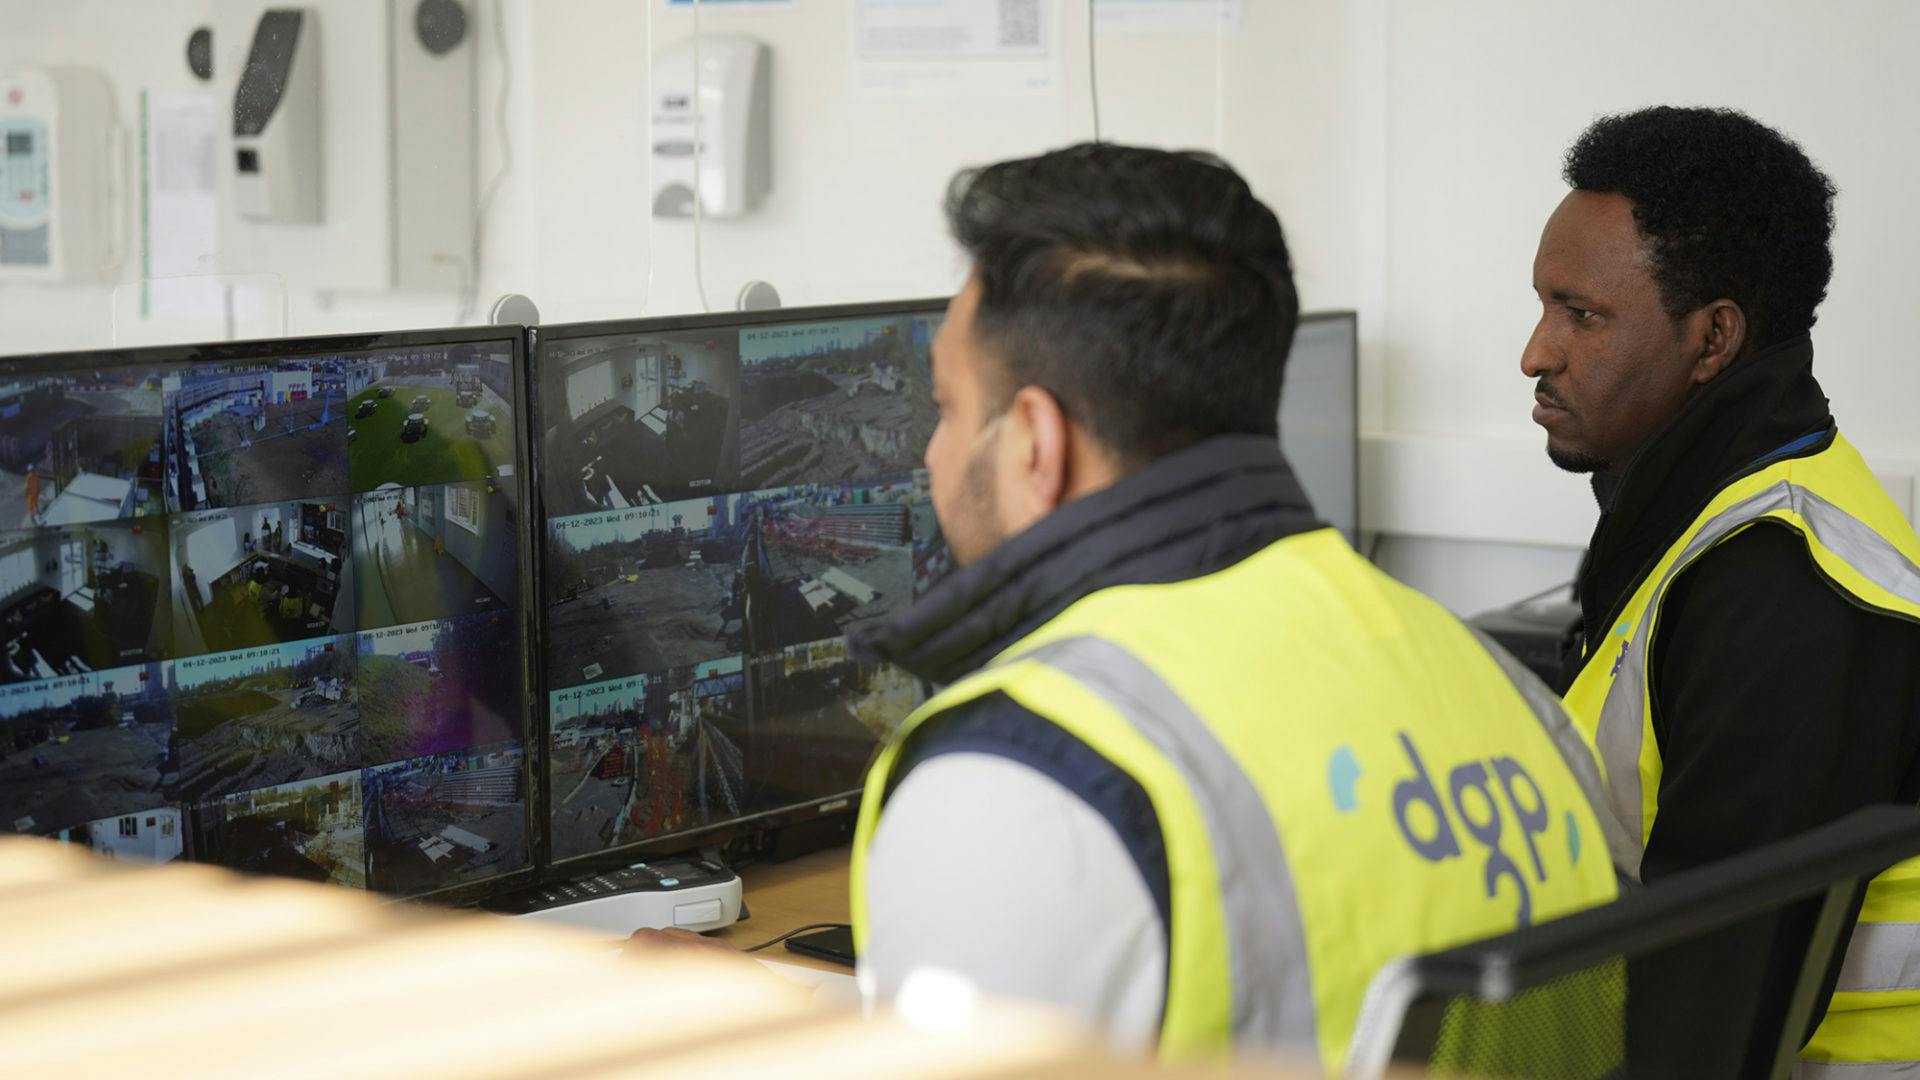 Two workers monitoring cctv on computers